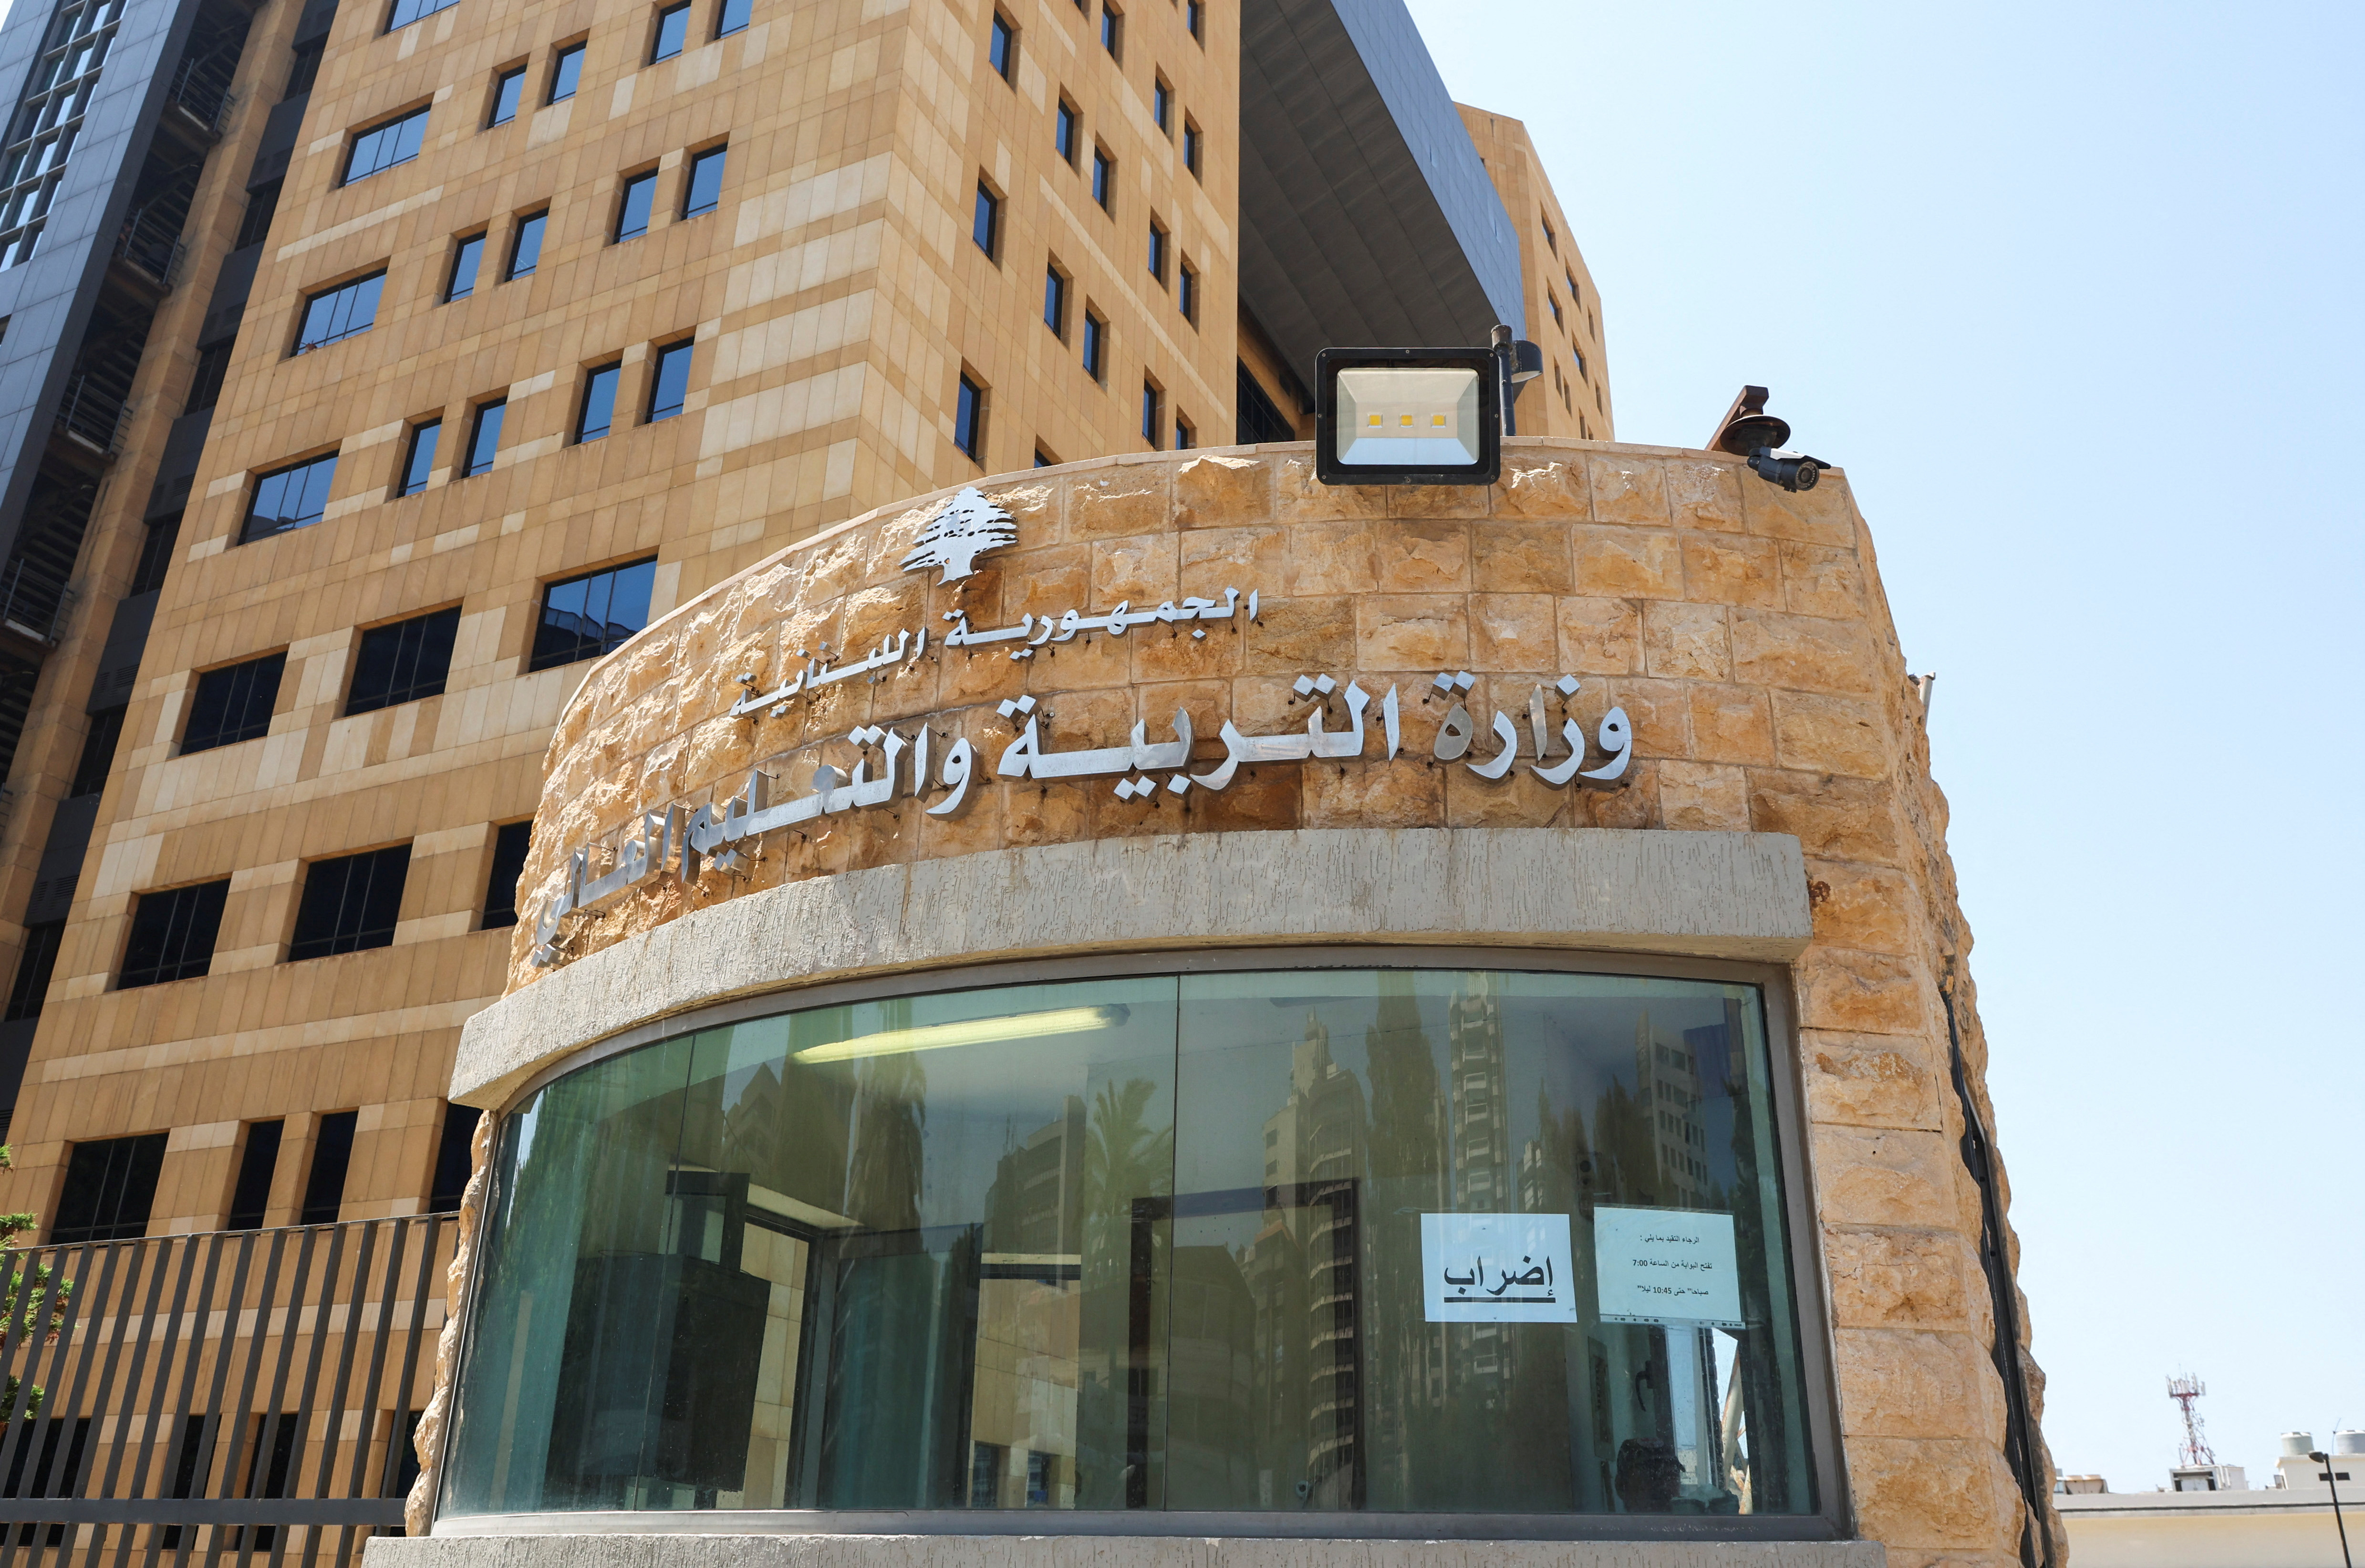 A view shows the building of the Ministry of Education and Higher Education in Beirut